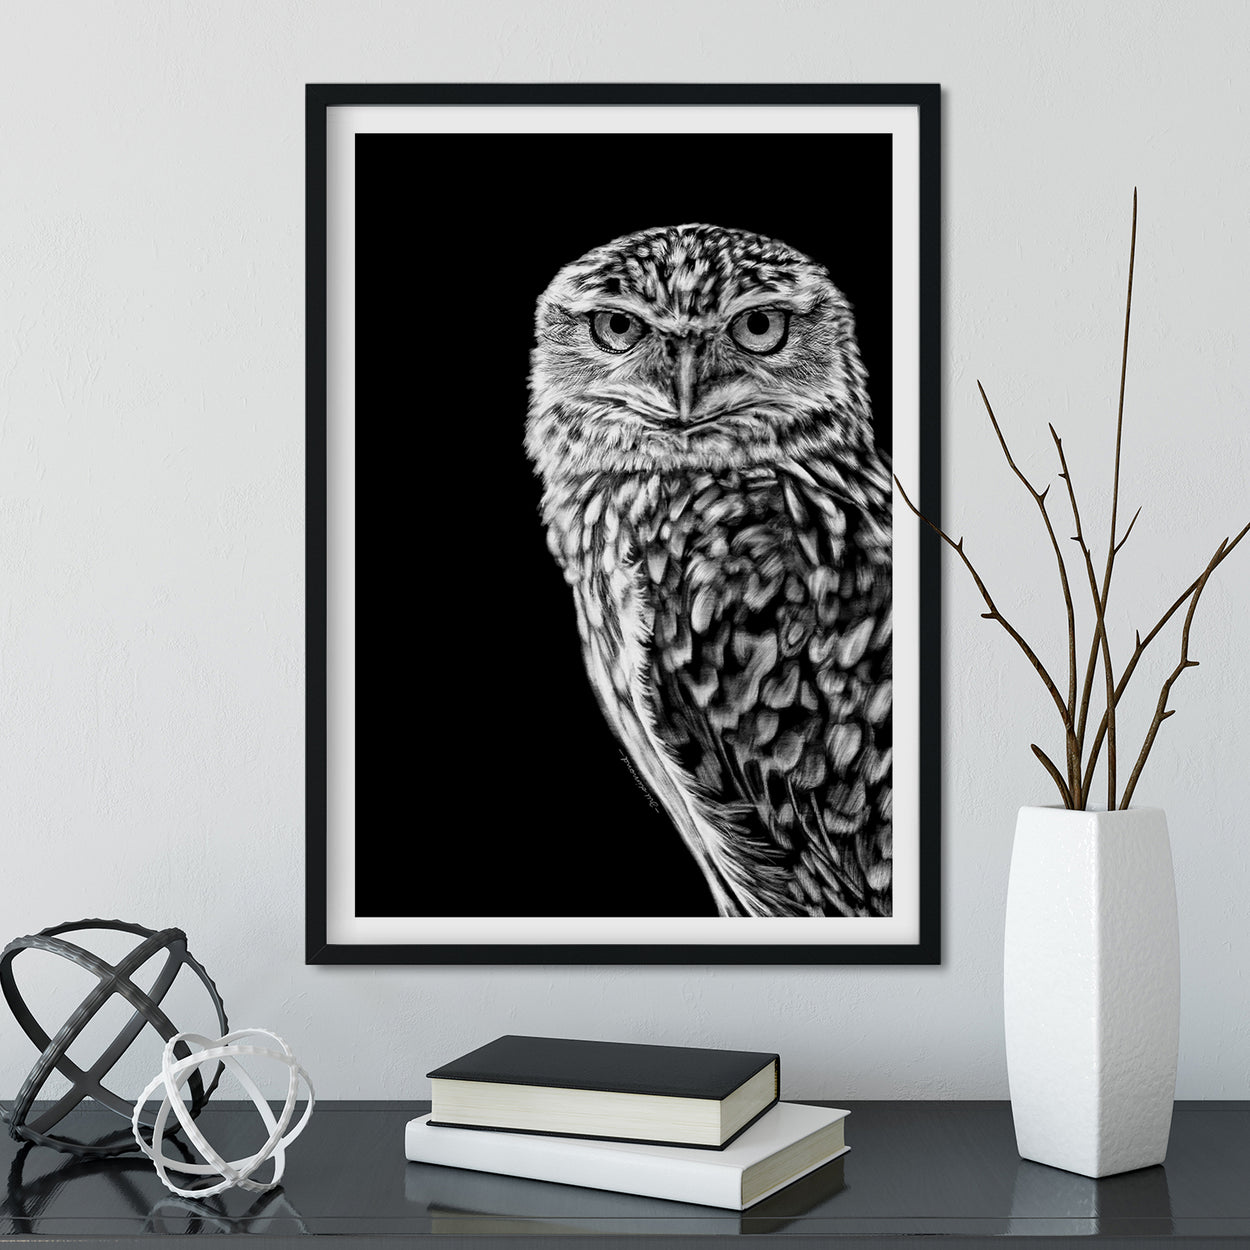 Burrowing Owl Wall Art Framed - The Thriving Wild